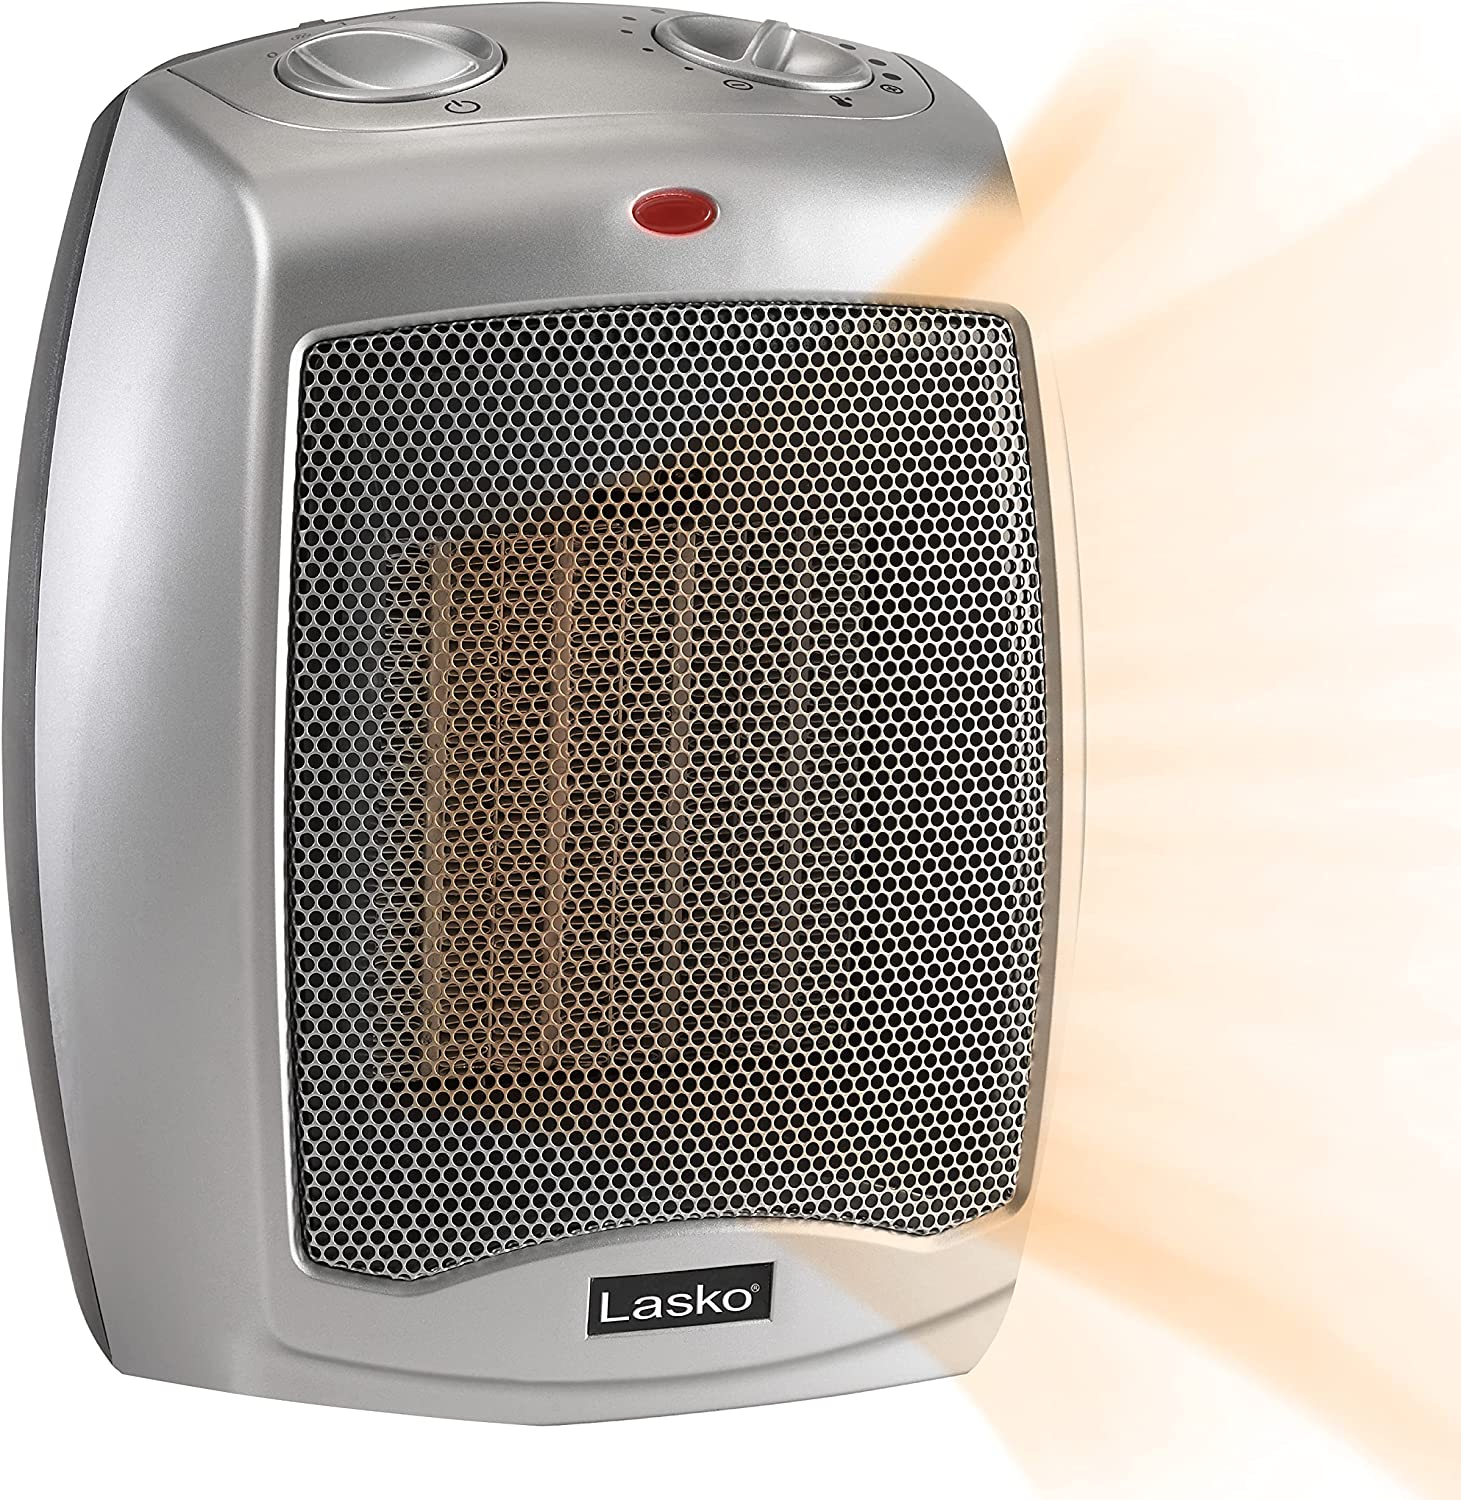 The Best Electric Space Heater in 2022